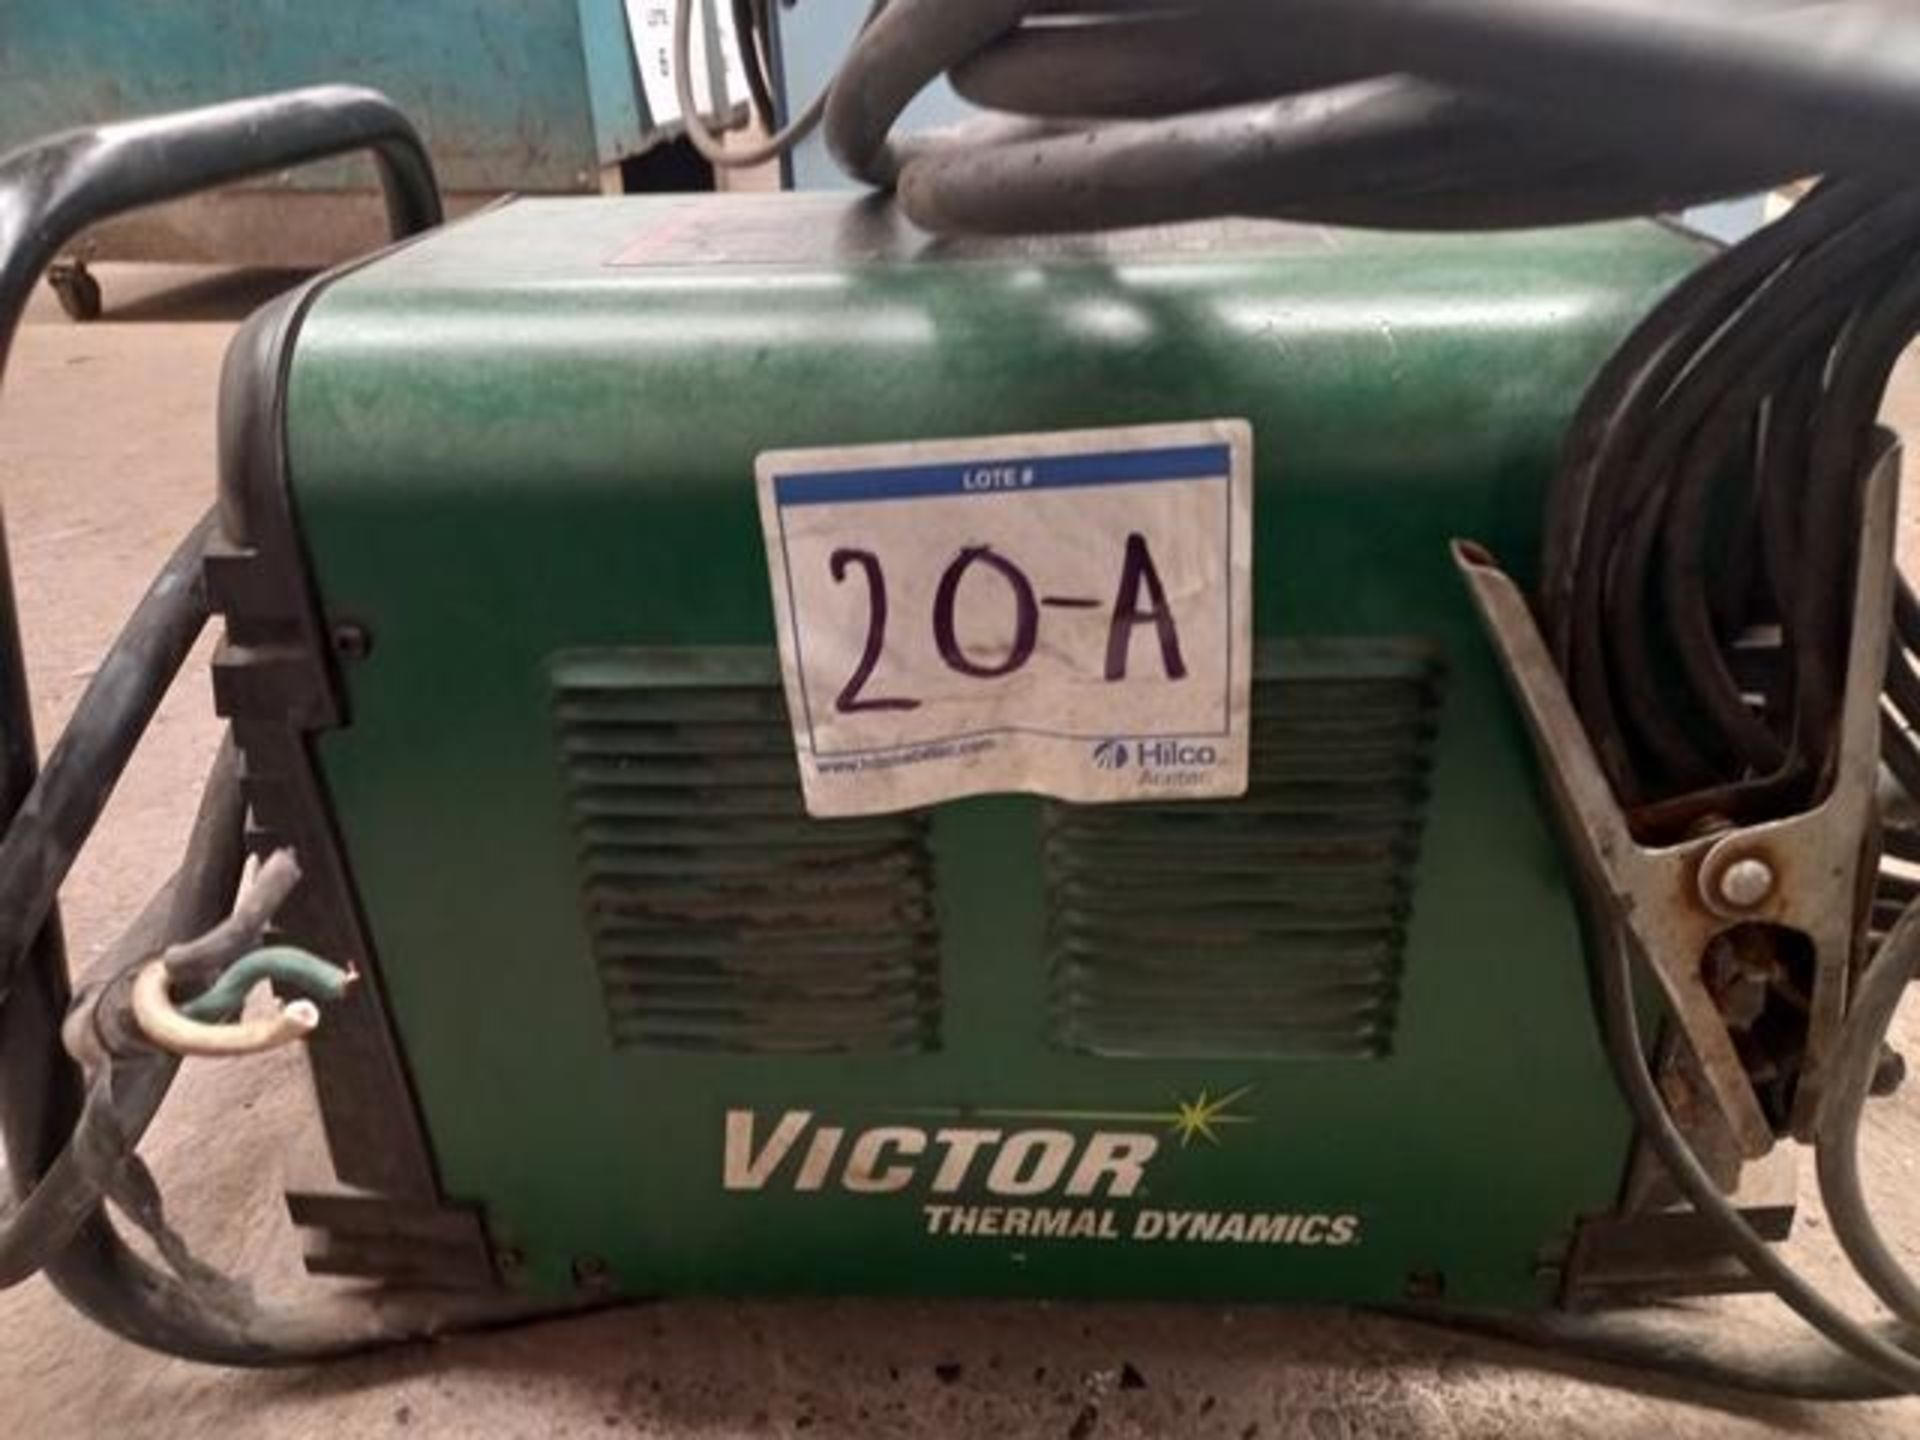 Victor Cutmaster 52 Welding Machine, S/N: 1835034403: Cutting Capacity of 1/2 In (12 Mm) Cuts Mild